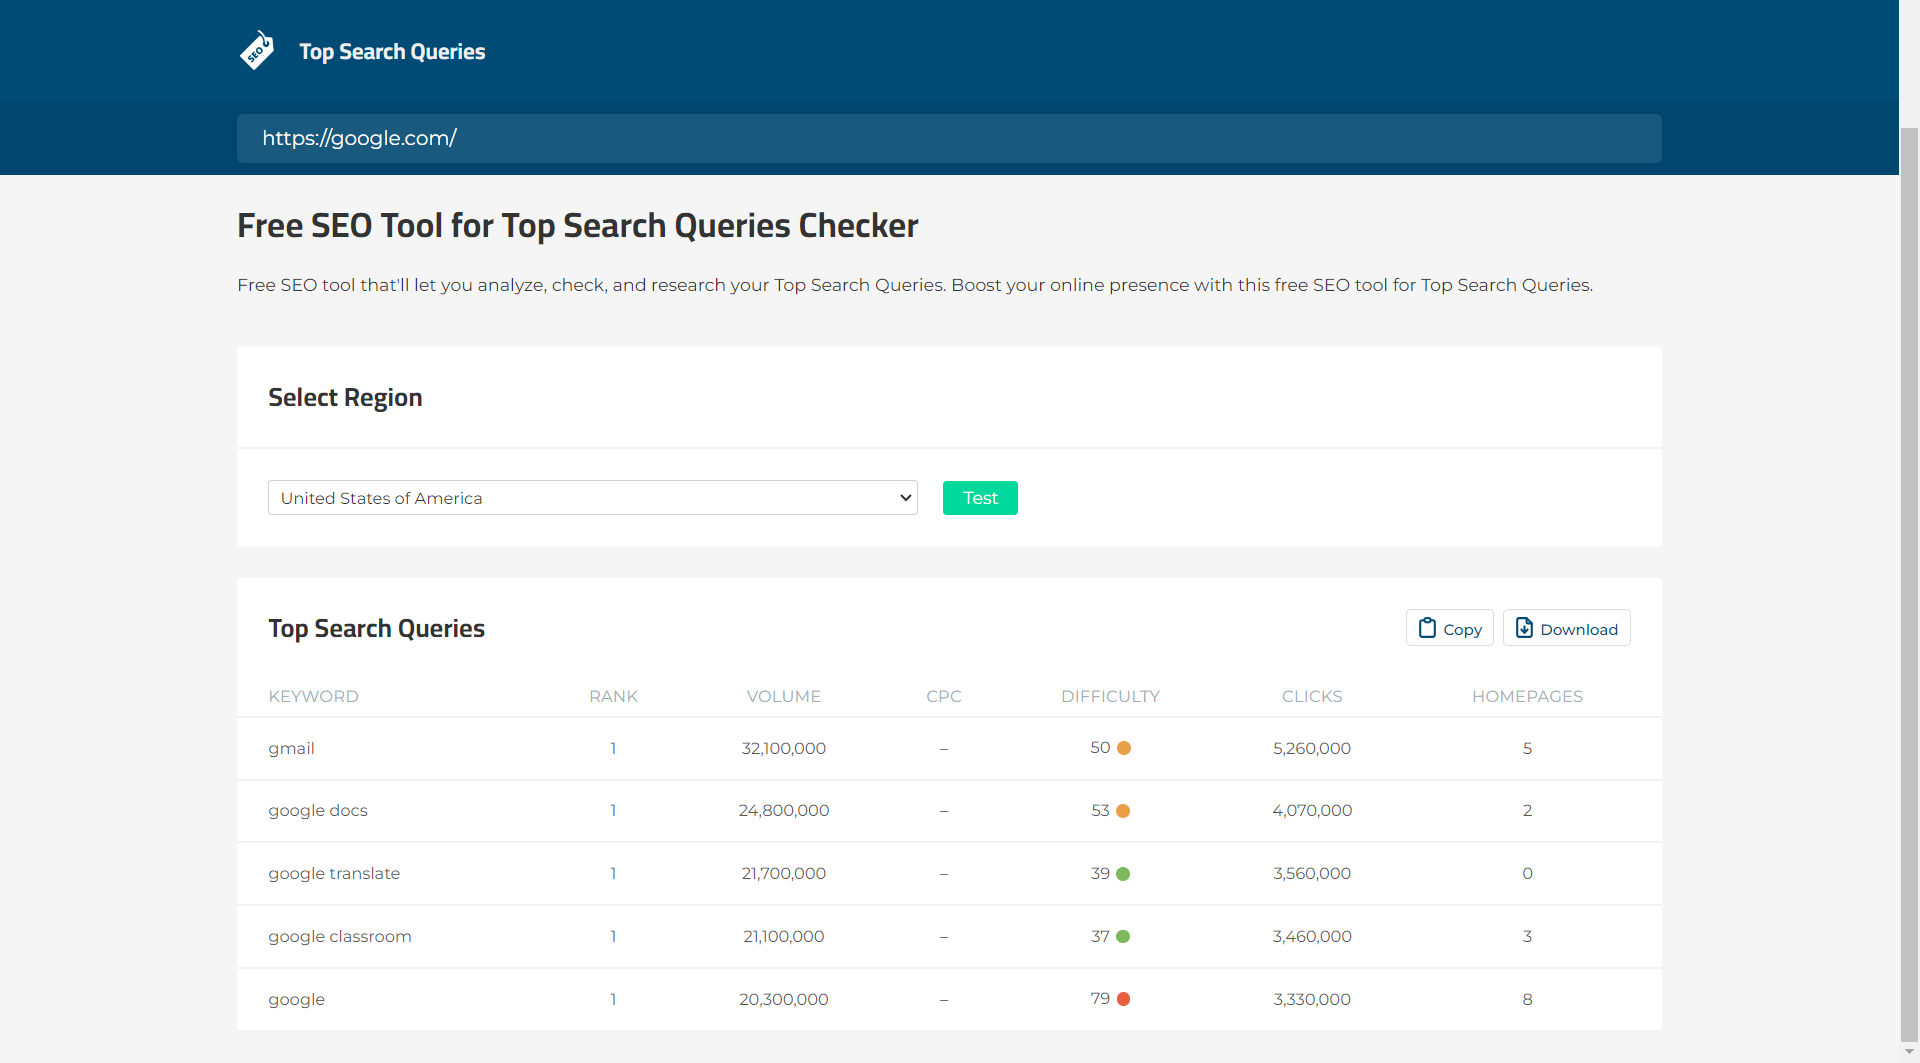 Screenshot of the Top Search Queries Tool.